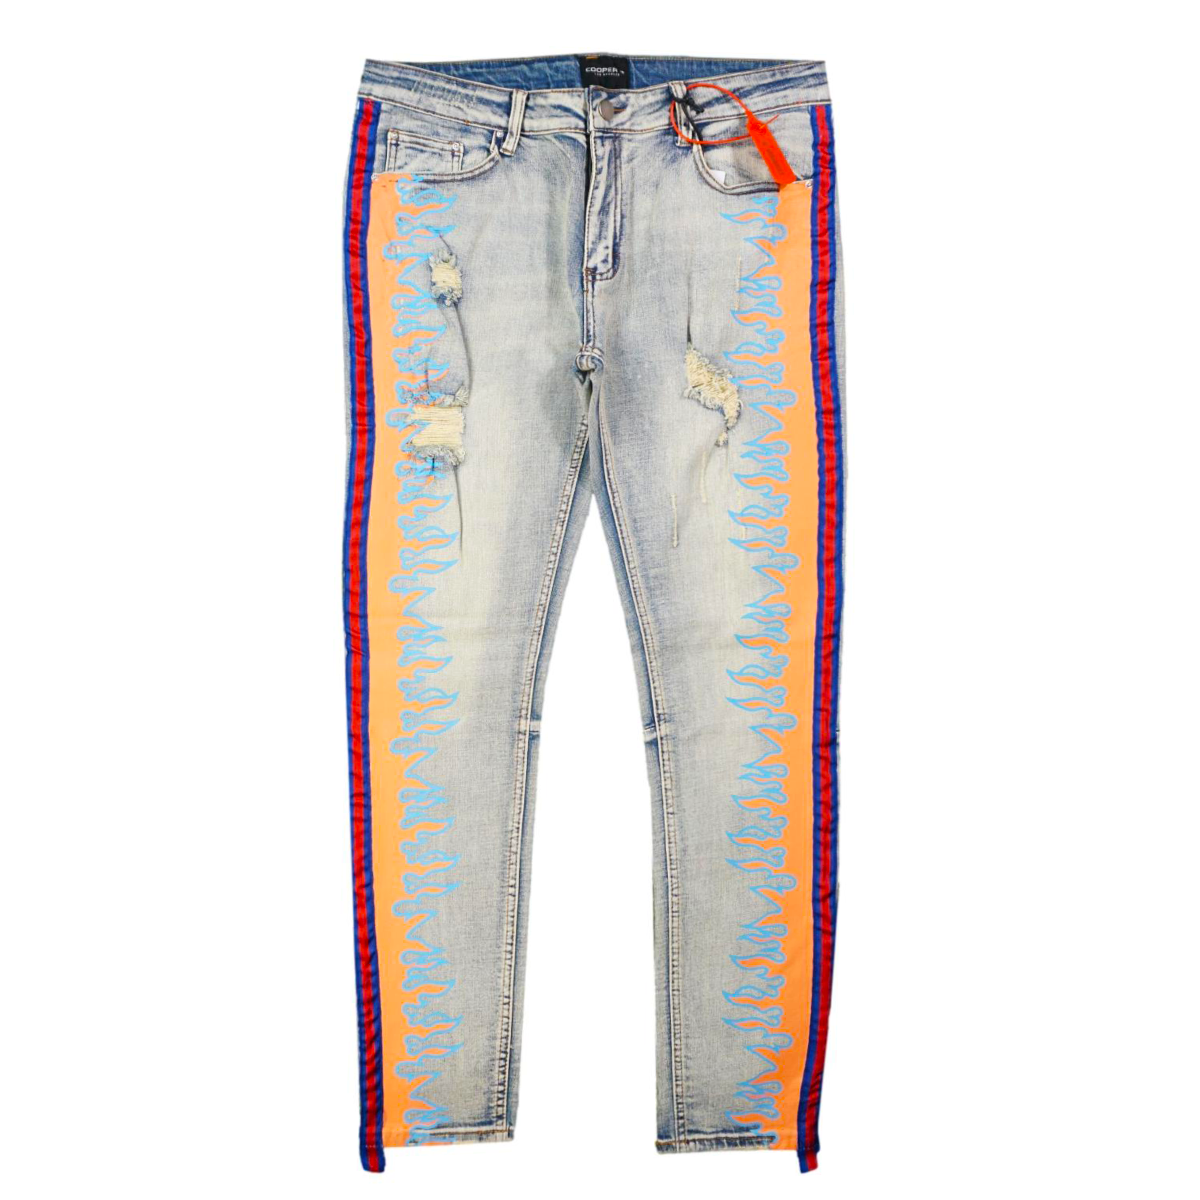 "Magma" Stripe Jeans (Pink/Baby Blue) /C2